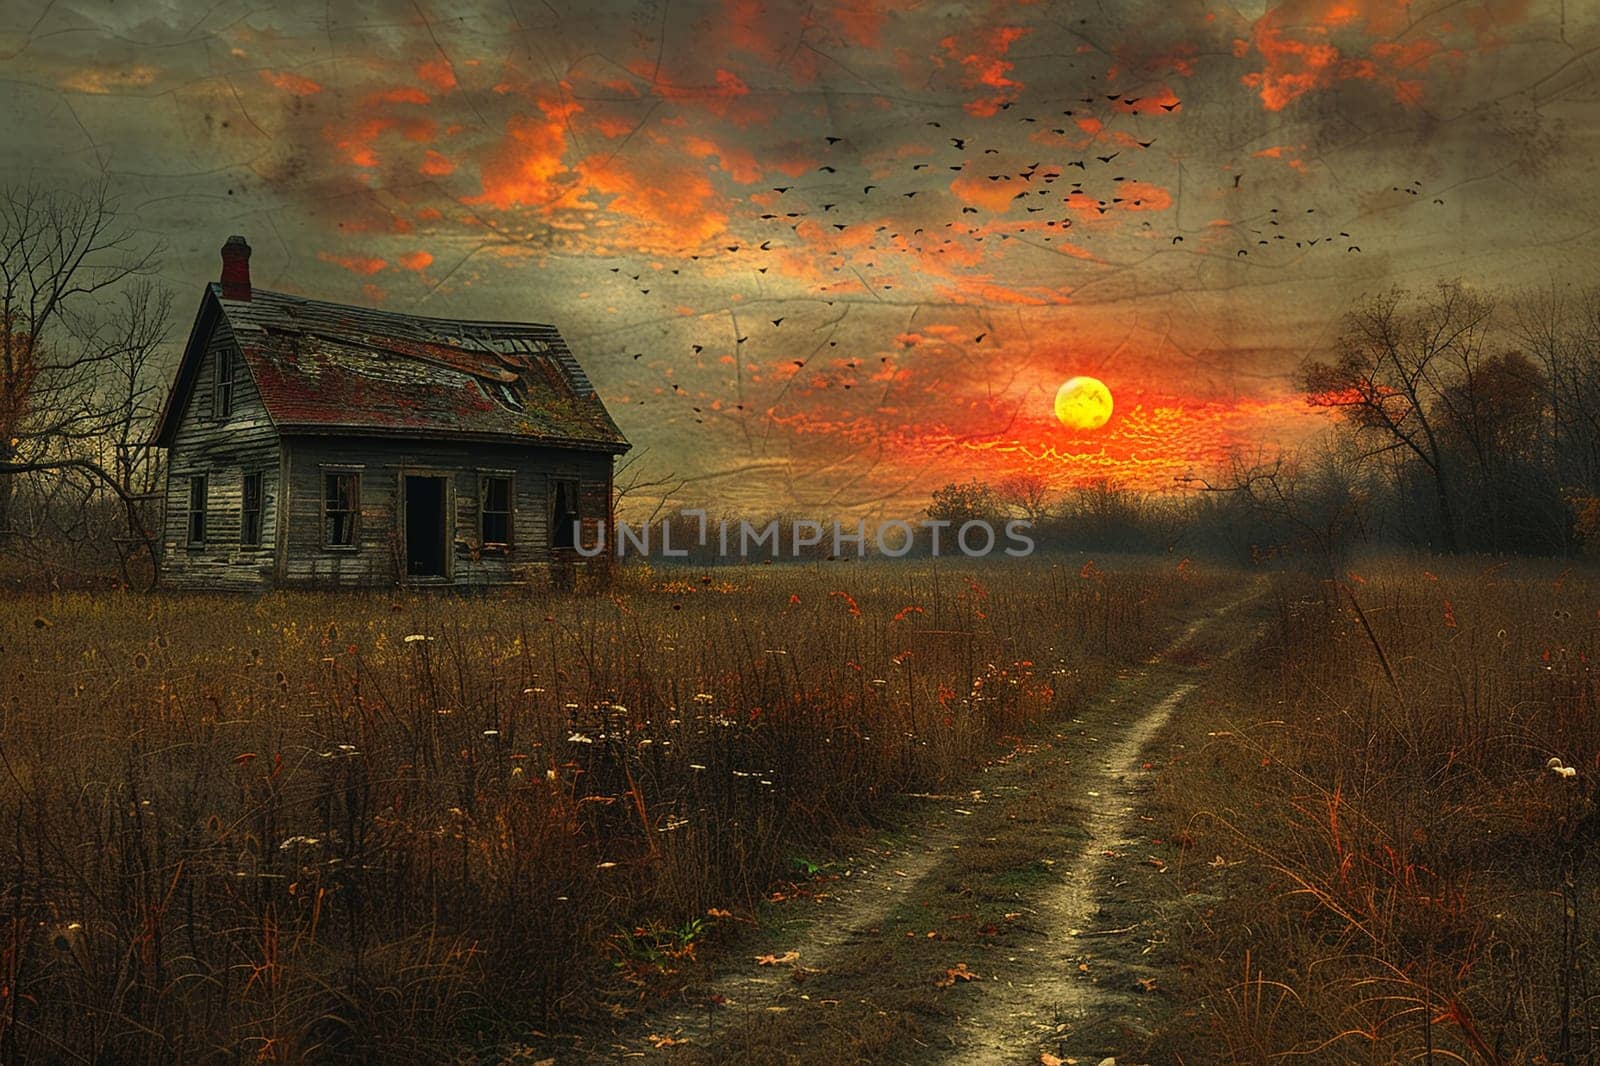 Dilapidated Homestead Fading into a Rural Sunset, The wood blurs with the horizon, a day's end to stories etched in time.